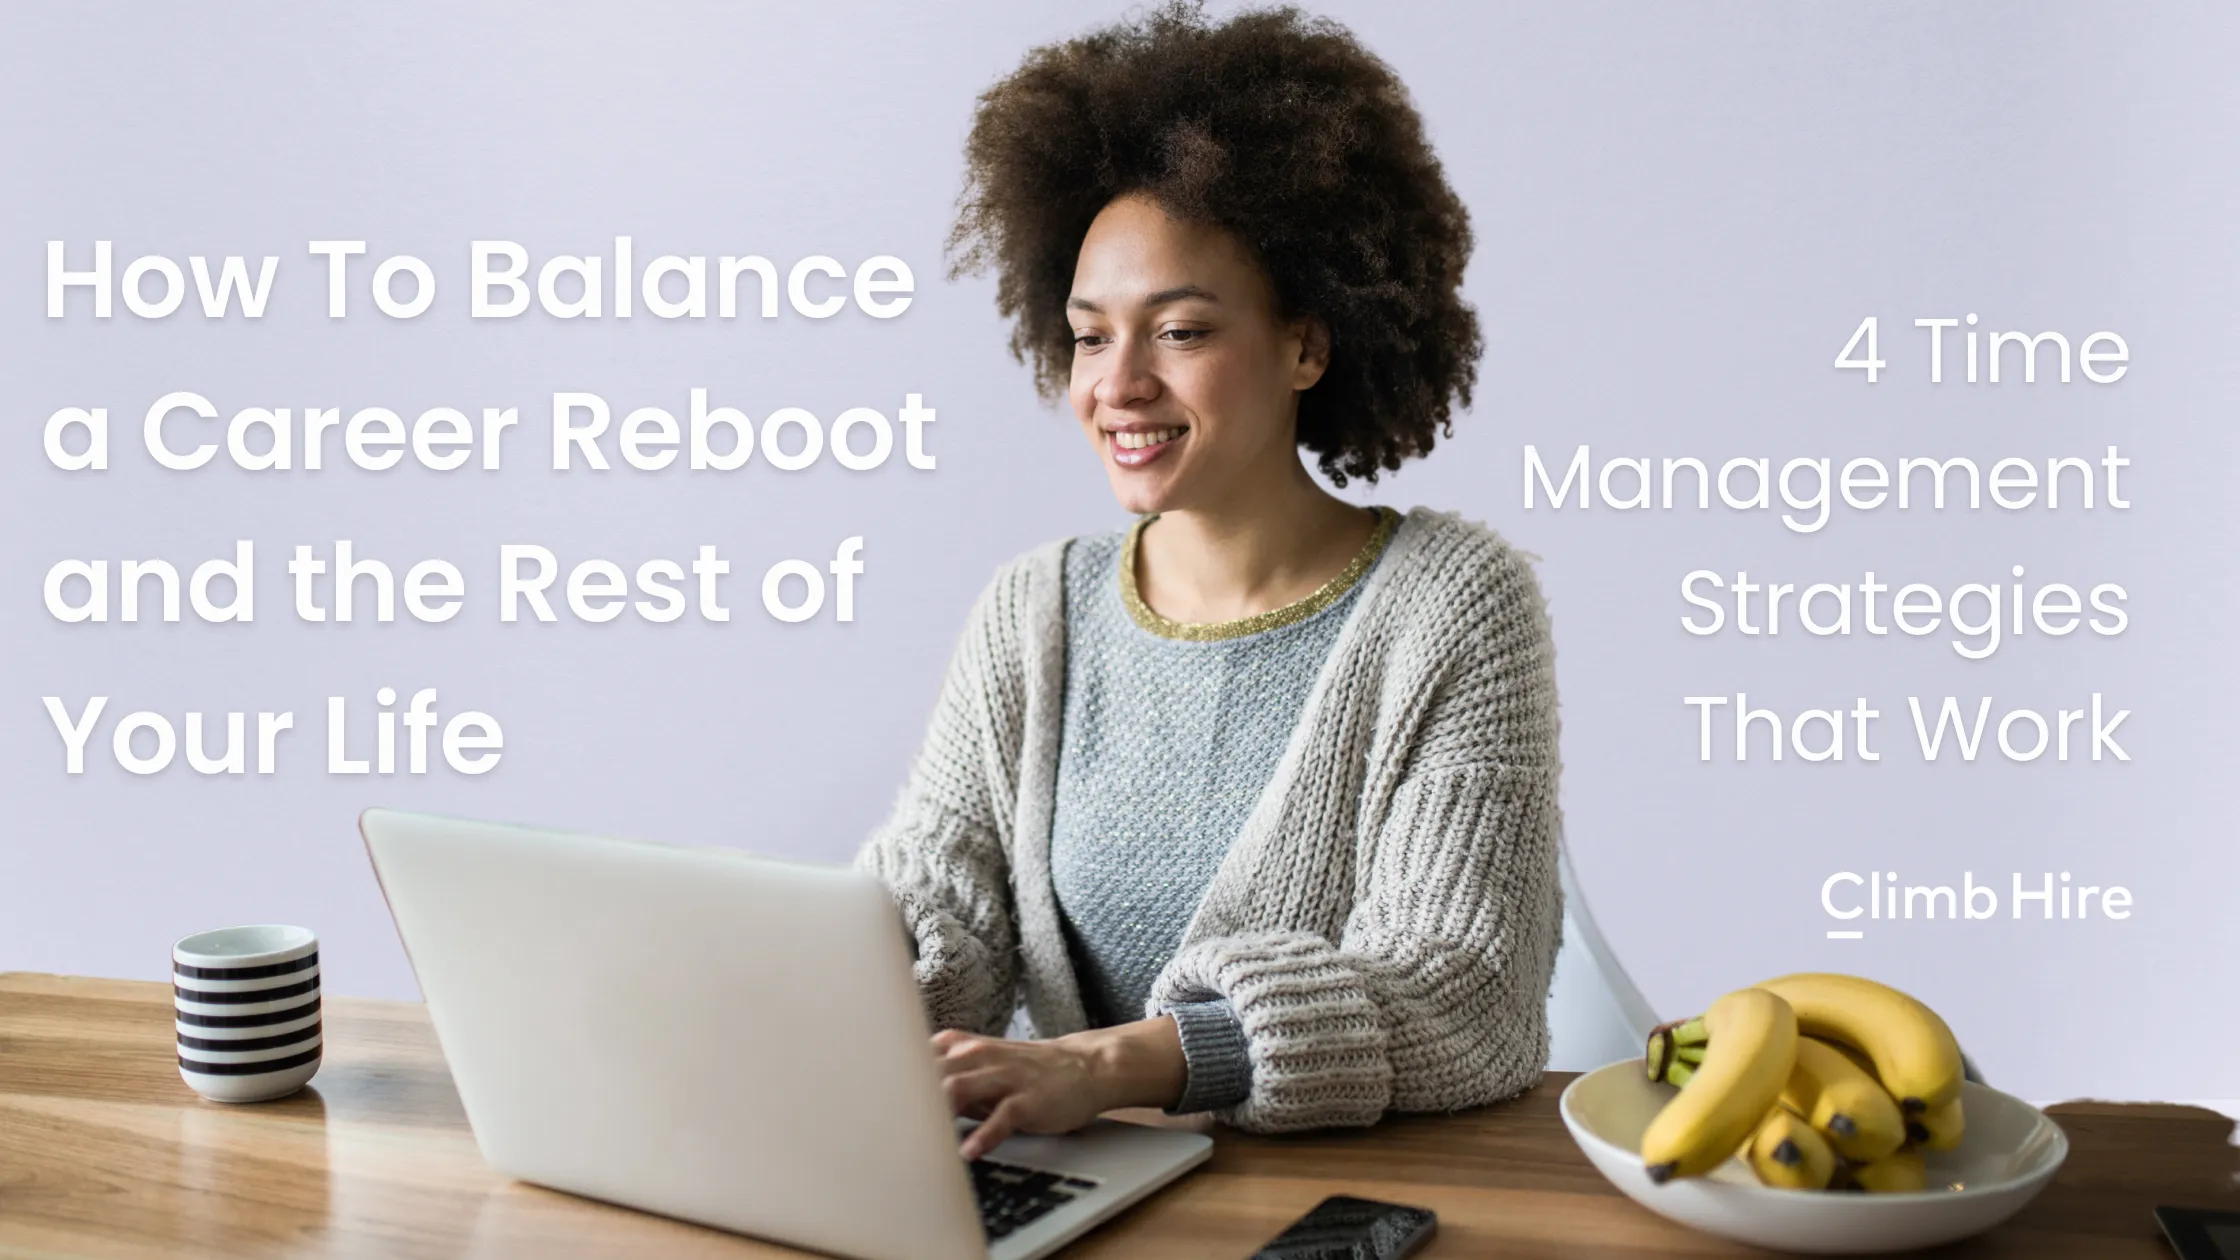 how to balance a career reboot and the rest of your life. 4 time management strategies that work.